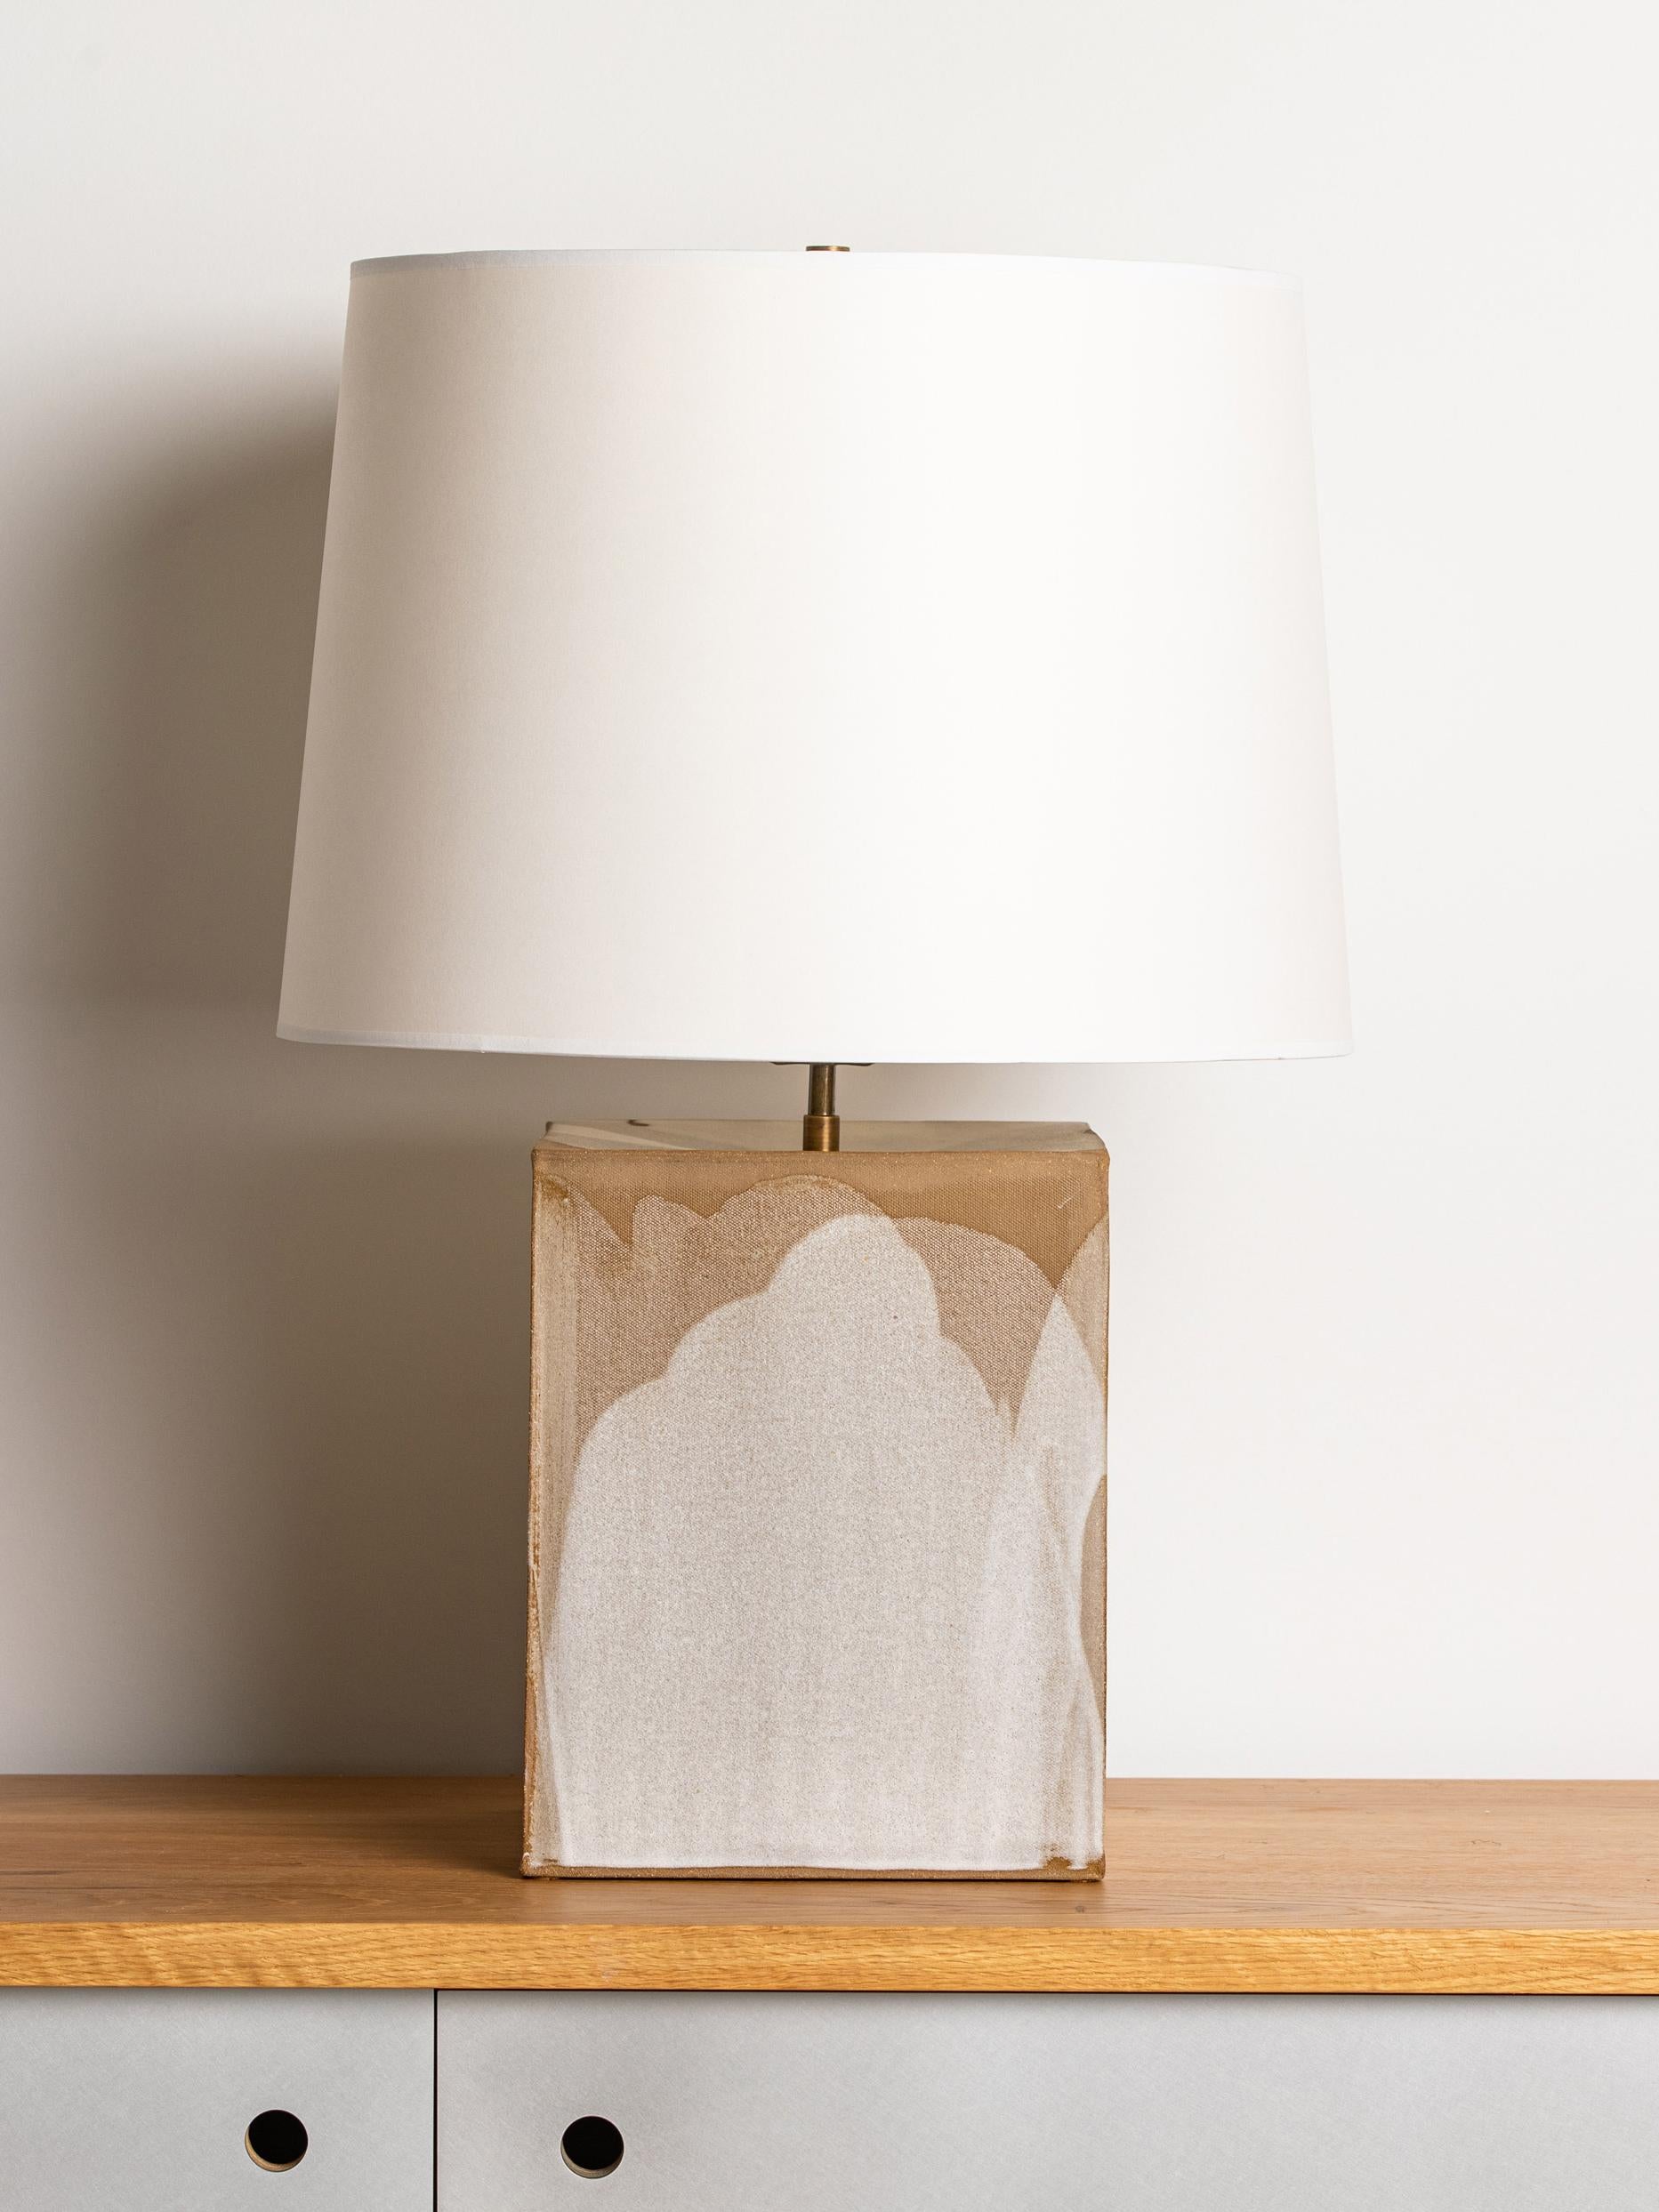 Our stoneware Washington Lamp is handcrafted using slab-construction techniques.

FINISH

- Poured glaze, pictured in parchment 
- Antique brass fittings
- Twisted black-cloth cord
- Full-range dimmer socket
- Off-white paper shade

BULB

75-watt